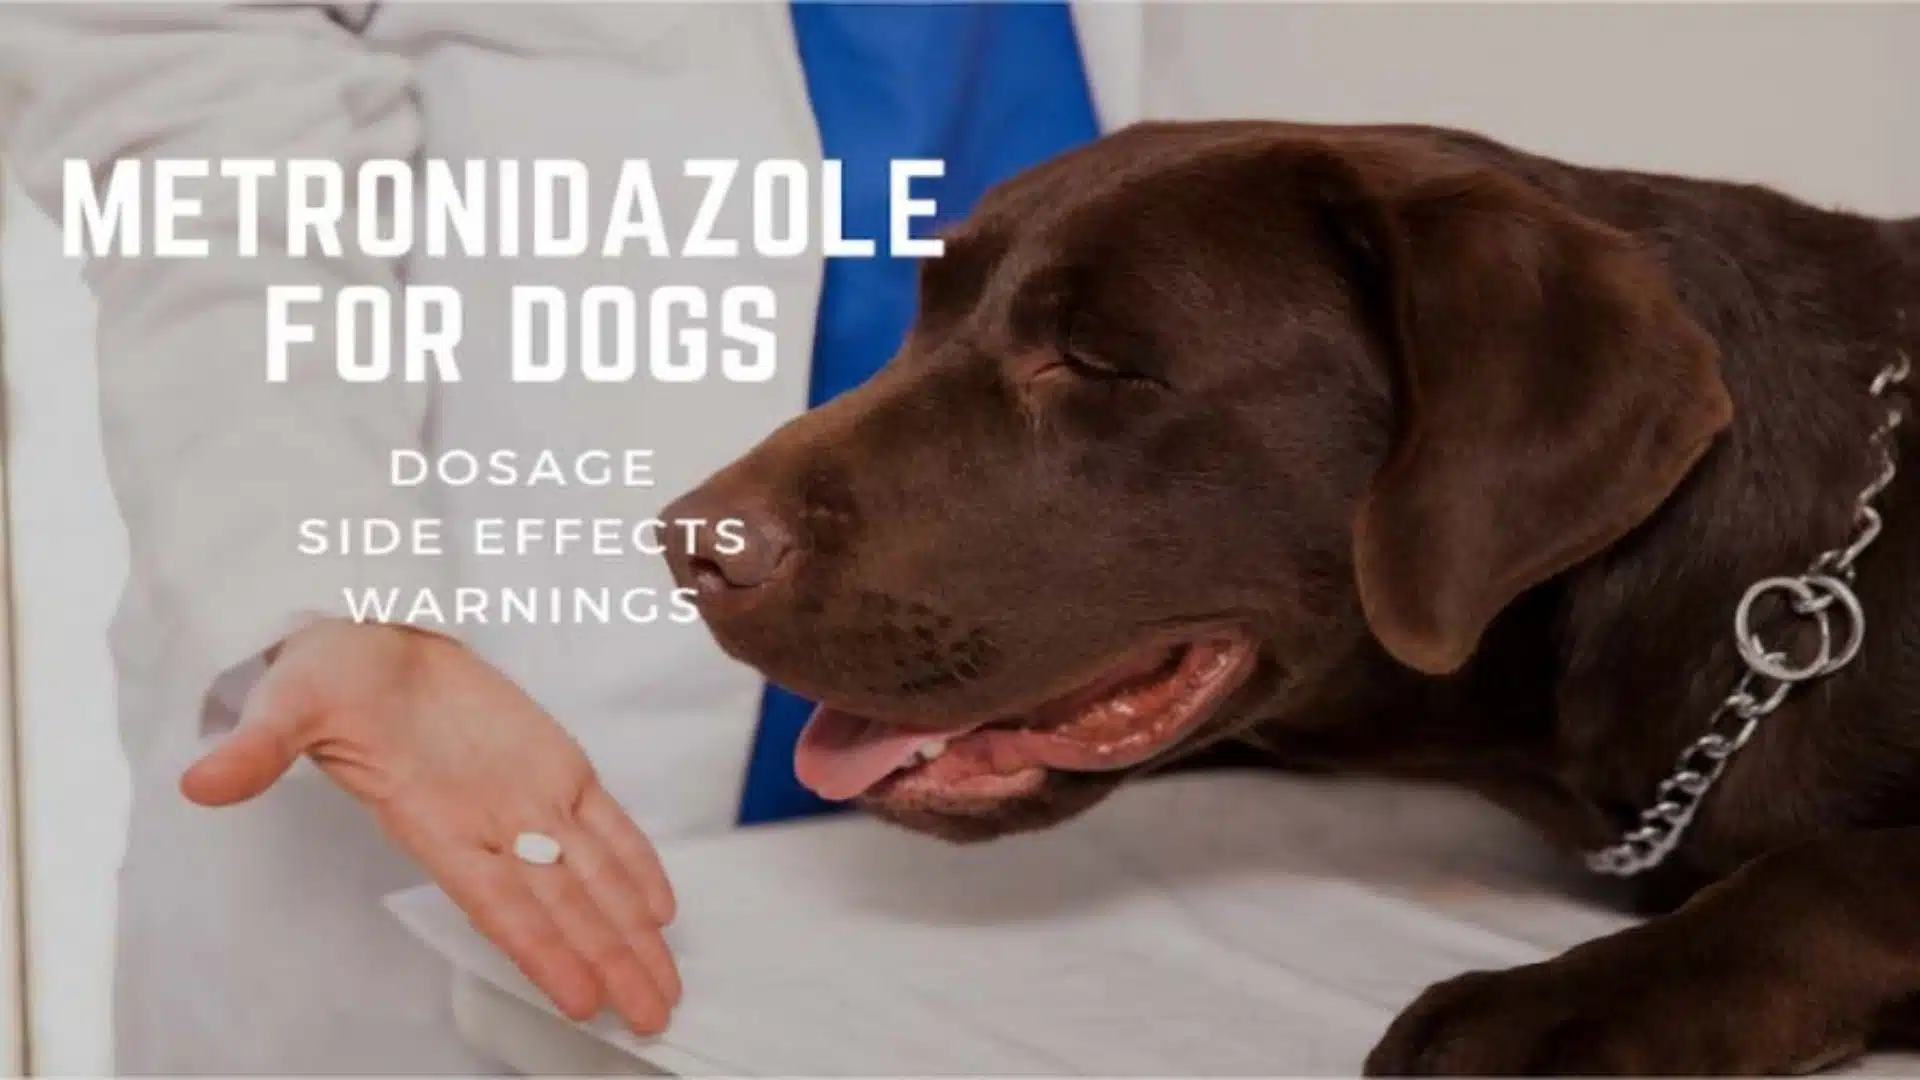 Metronidazole for Dogs: Dosage, Side Effects & Warnings